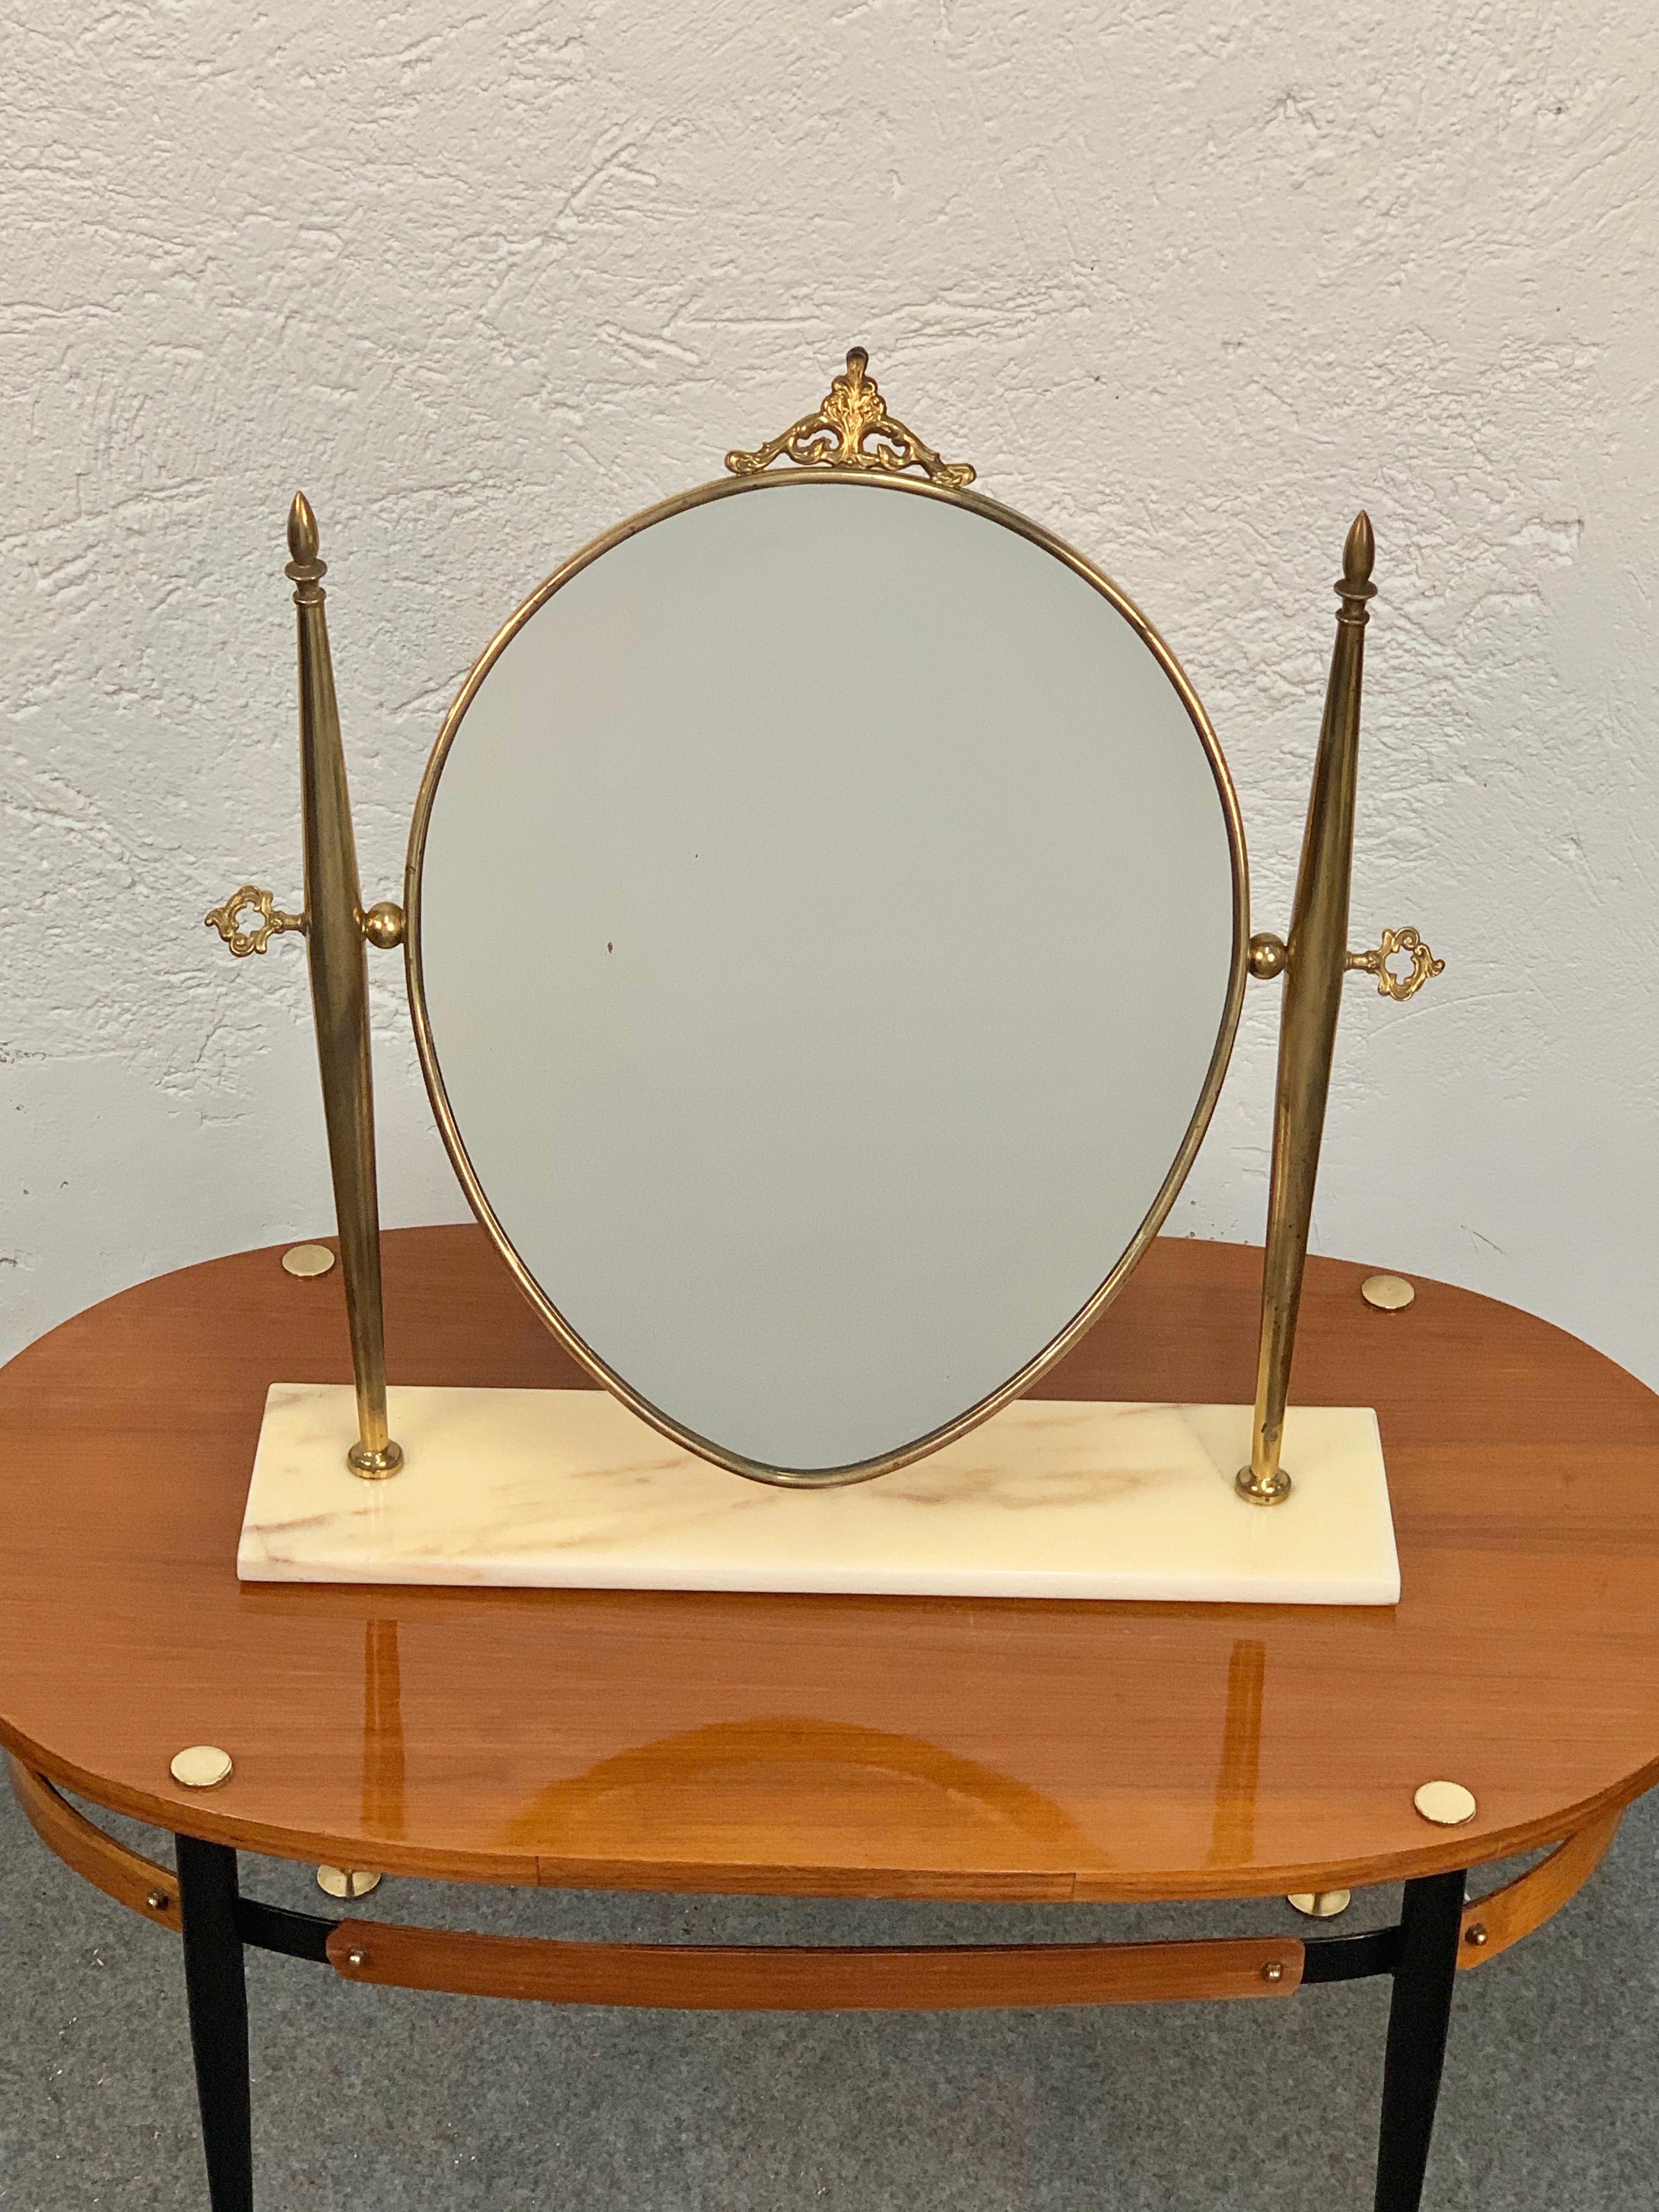 Wonderful table mirror in brass with adjustable marble vanity base vanity.

This elegant midcentury table or makeup mirror was designed and produced in Italy during the 1950s. 

The mirror has a solid brass structure with two columns, the base